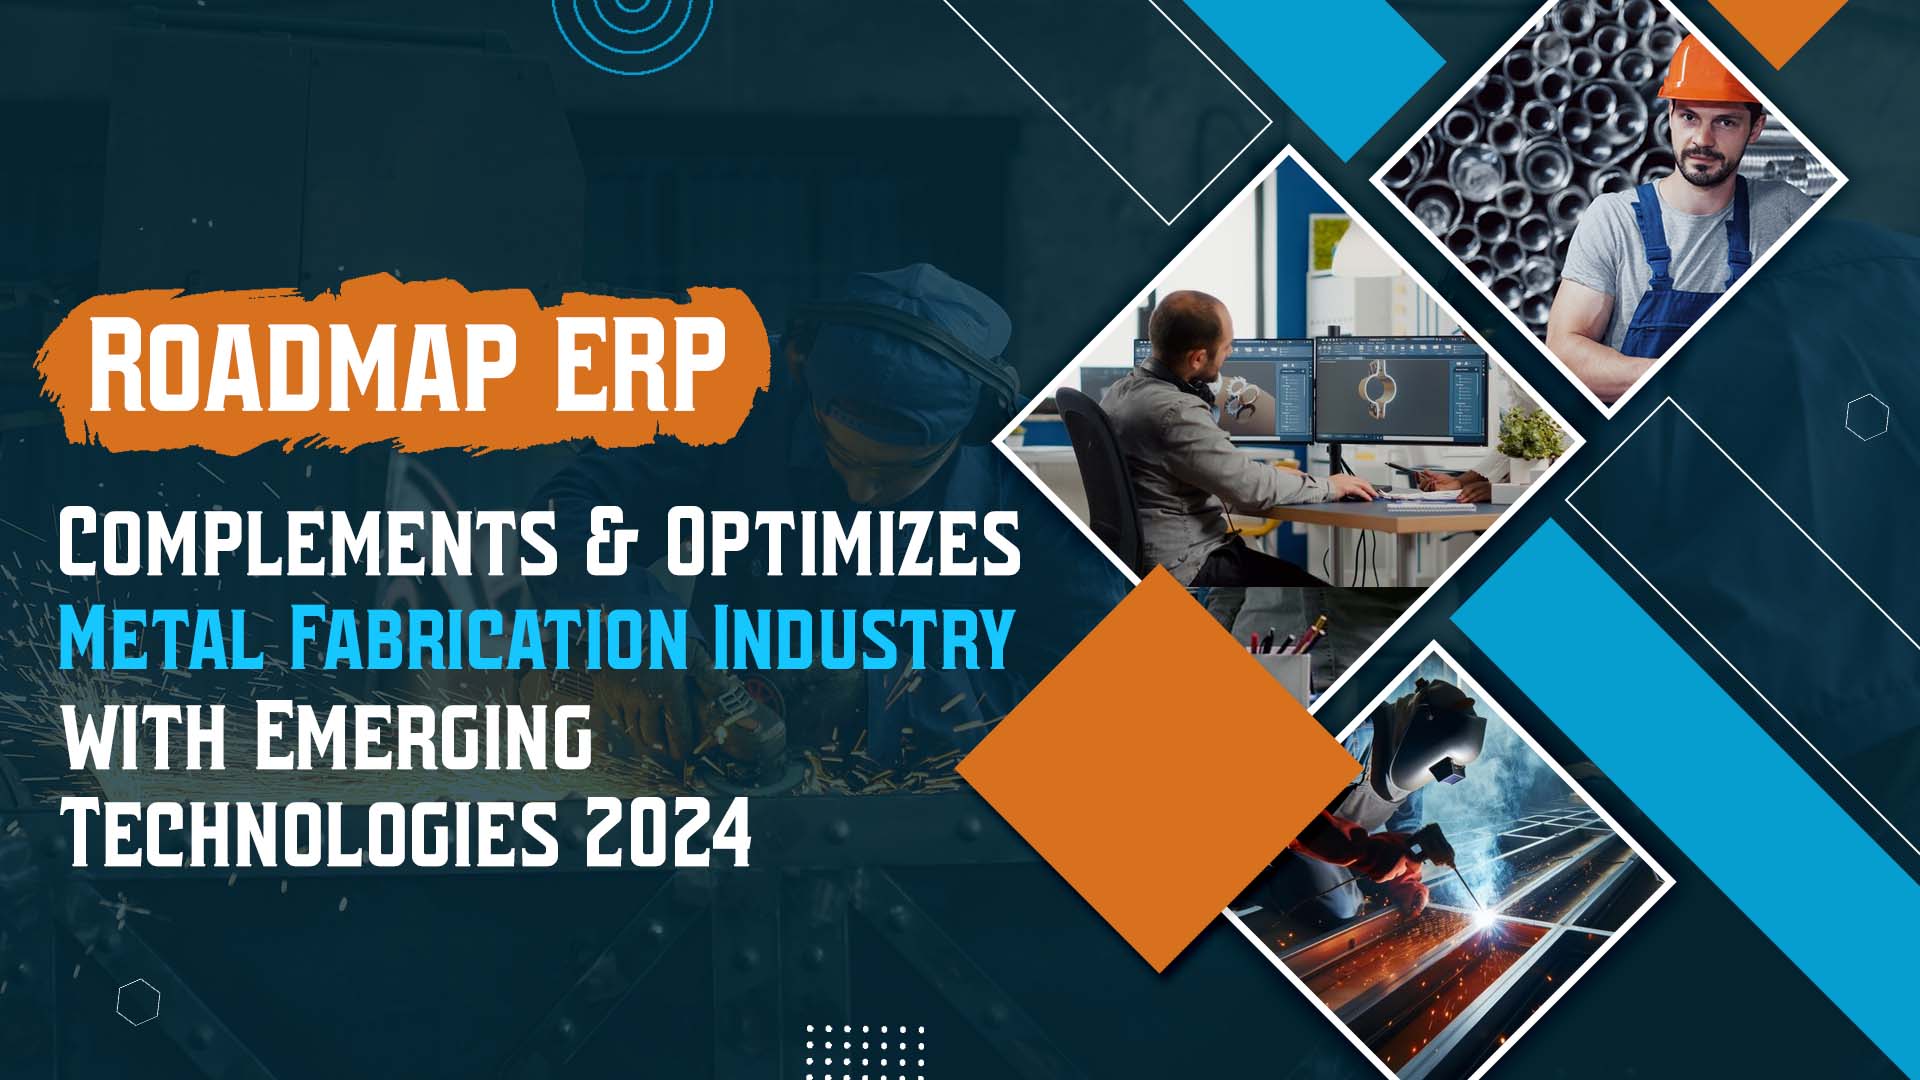 Roadmap ERP Complements and Optimizes Metal Fabrication Industry with Emerging Technologies 2024